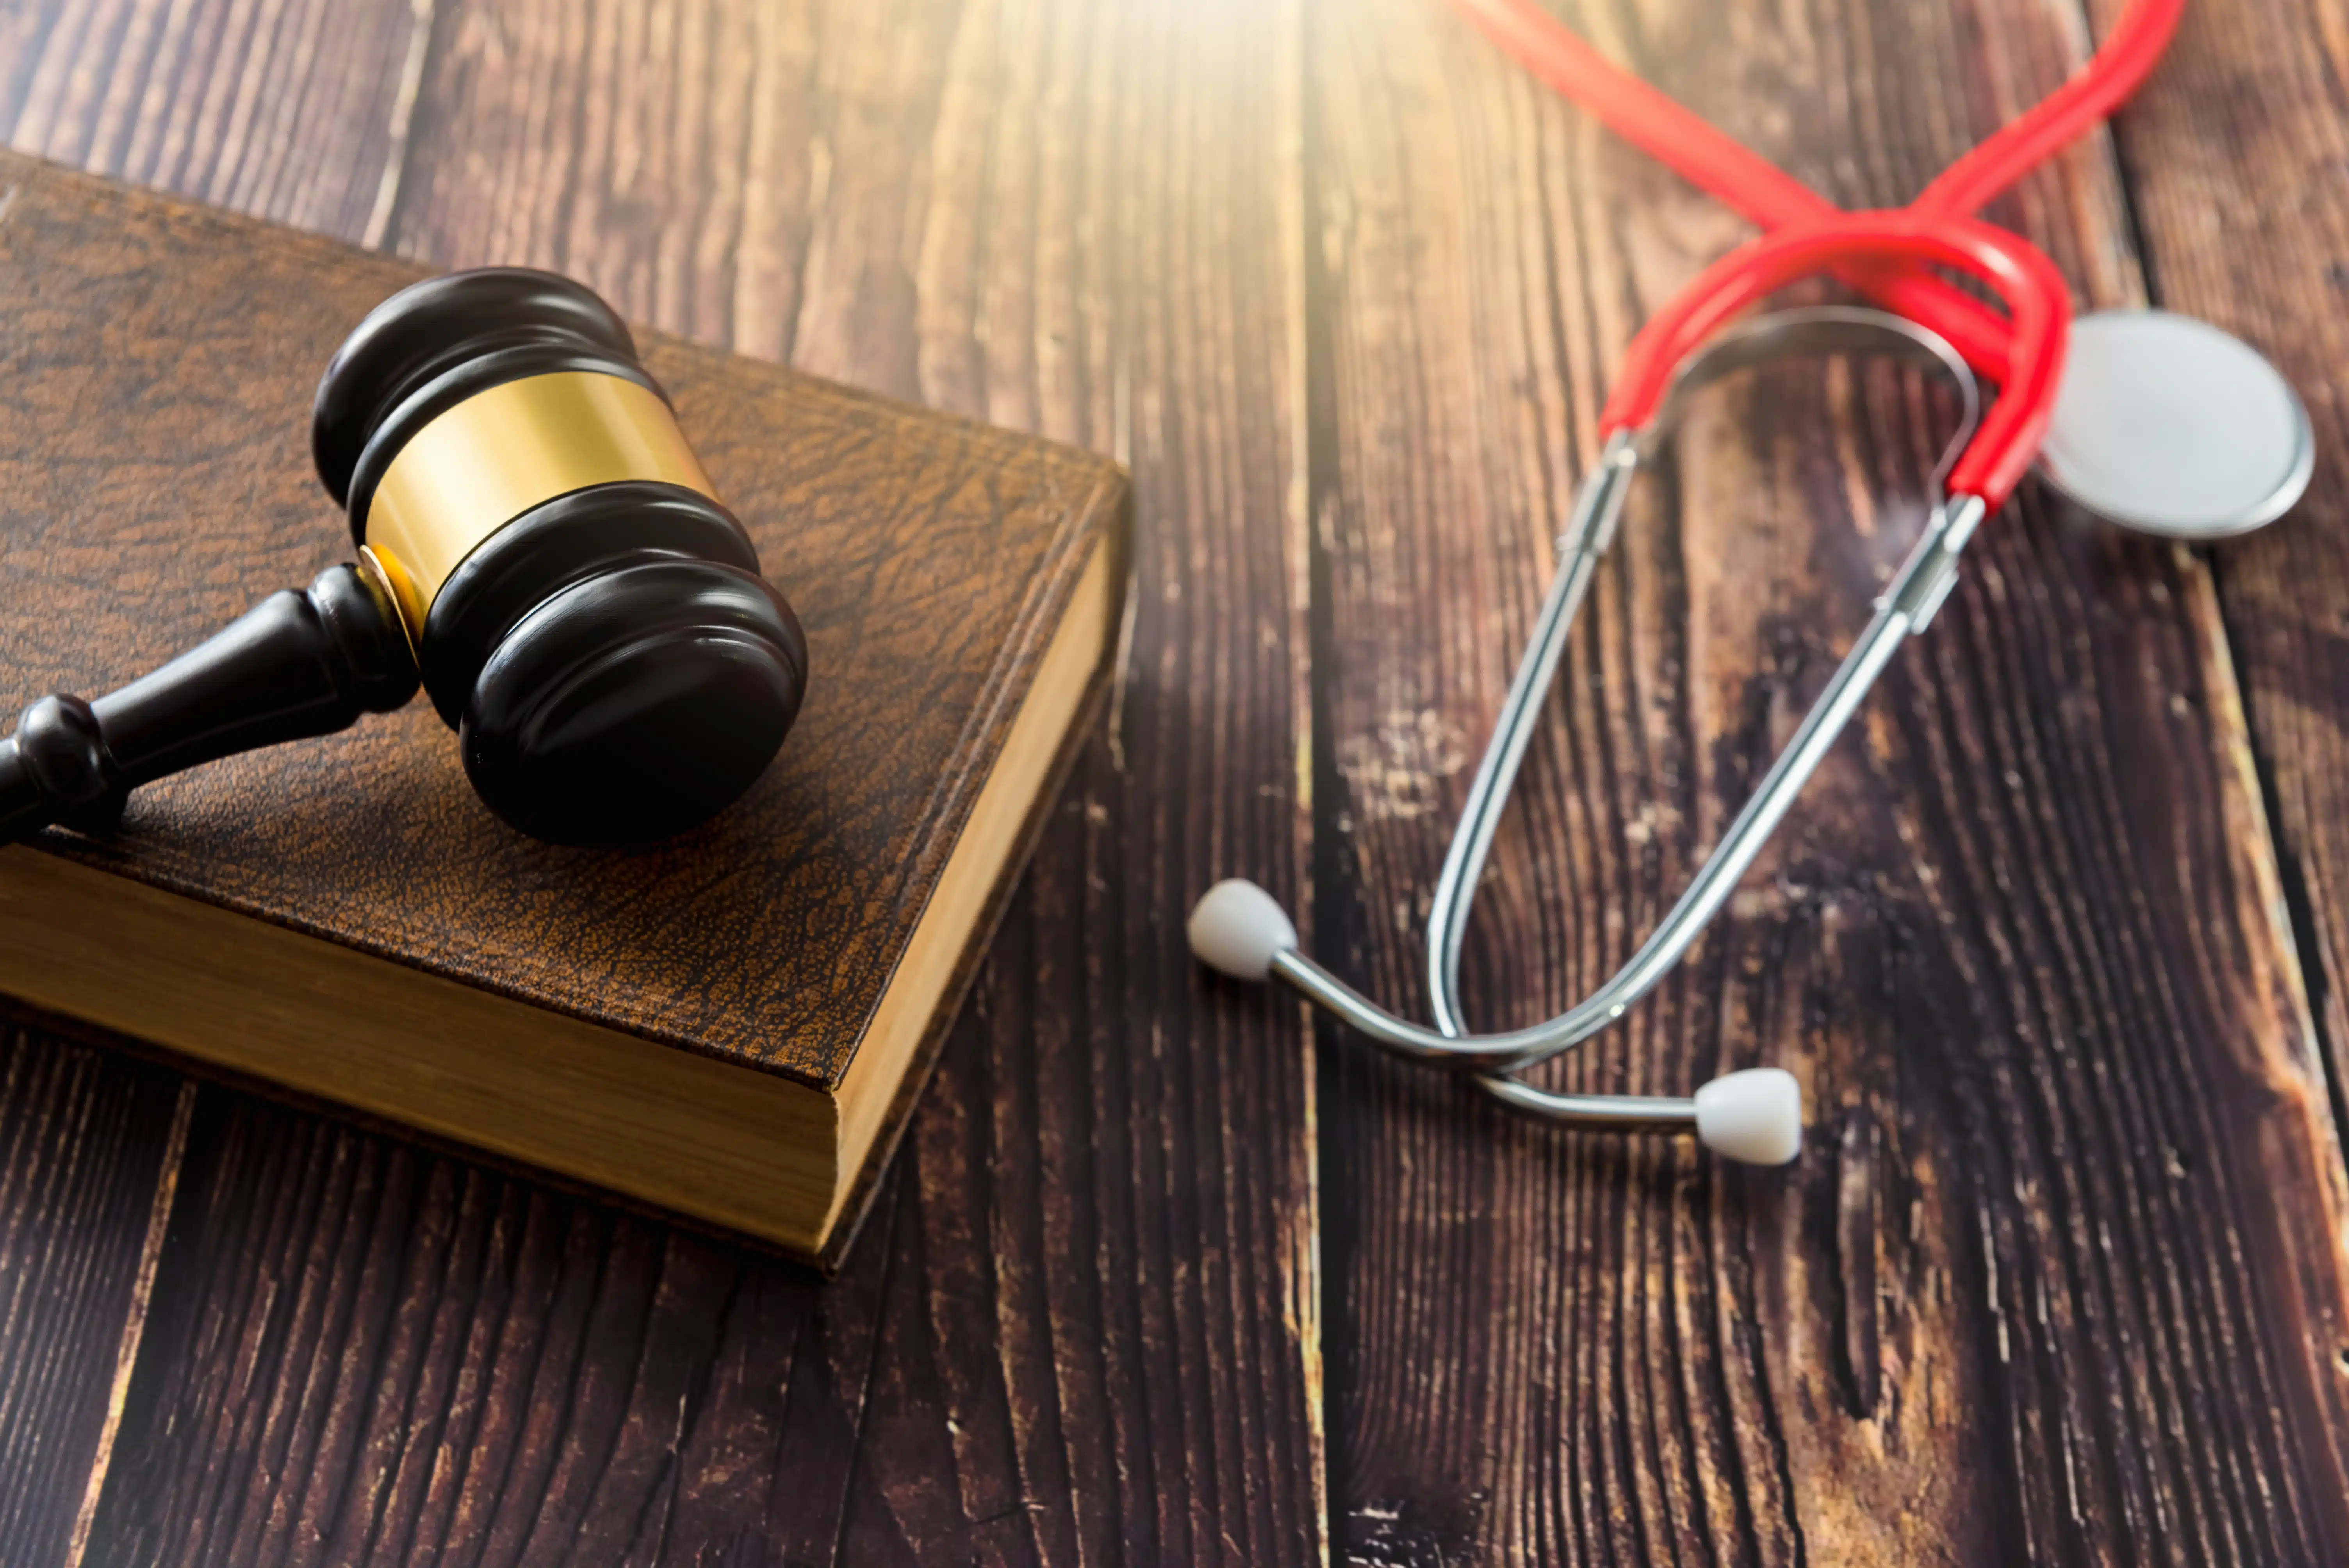 Gavel and book and stethoscope on a wooden table